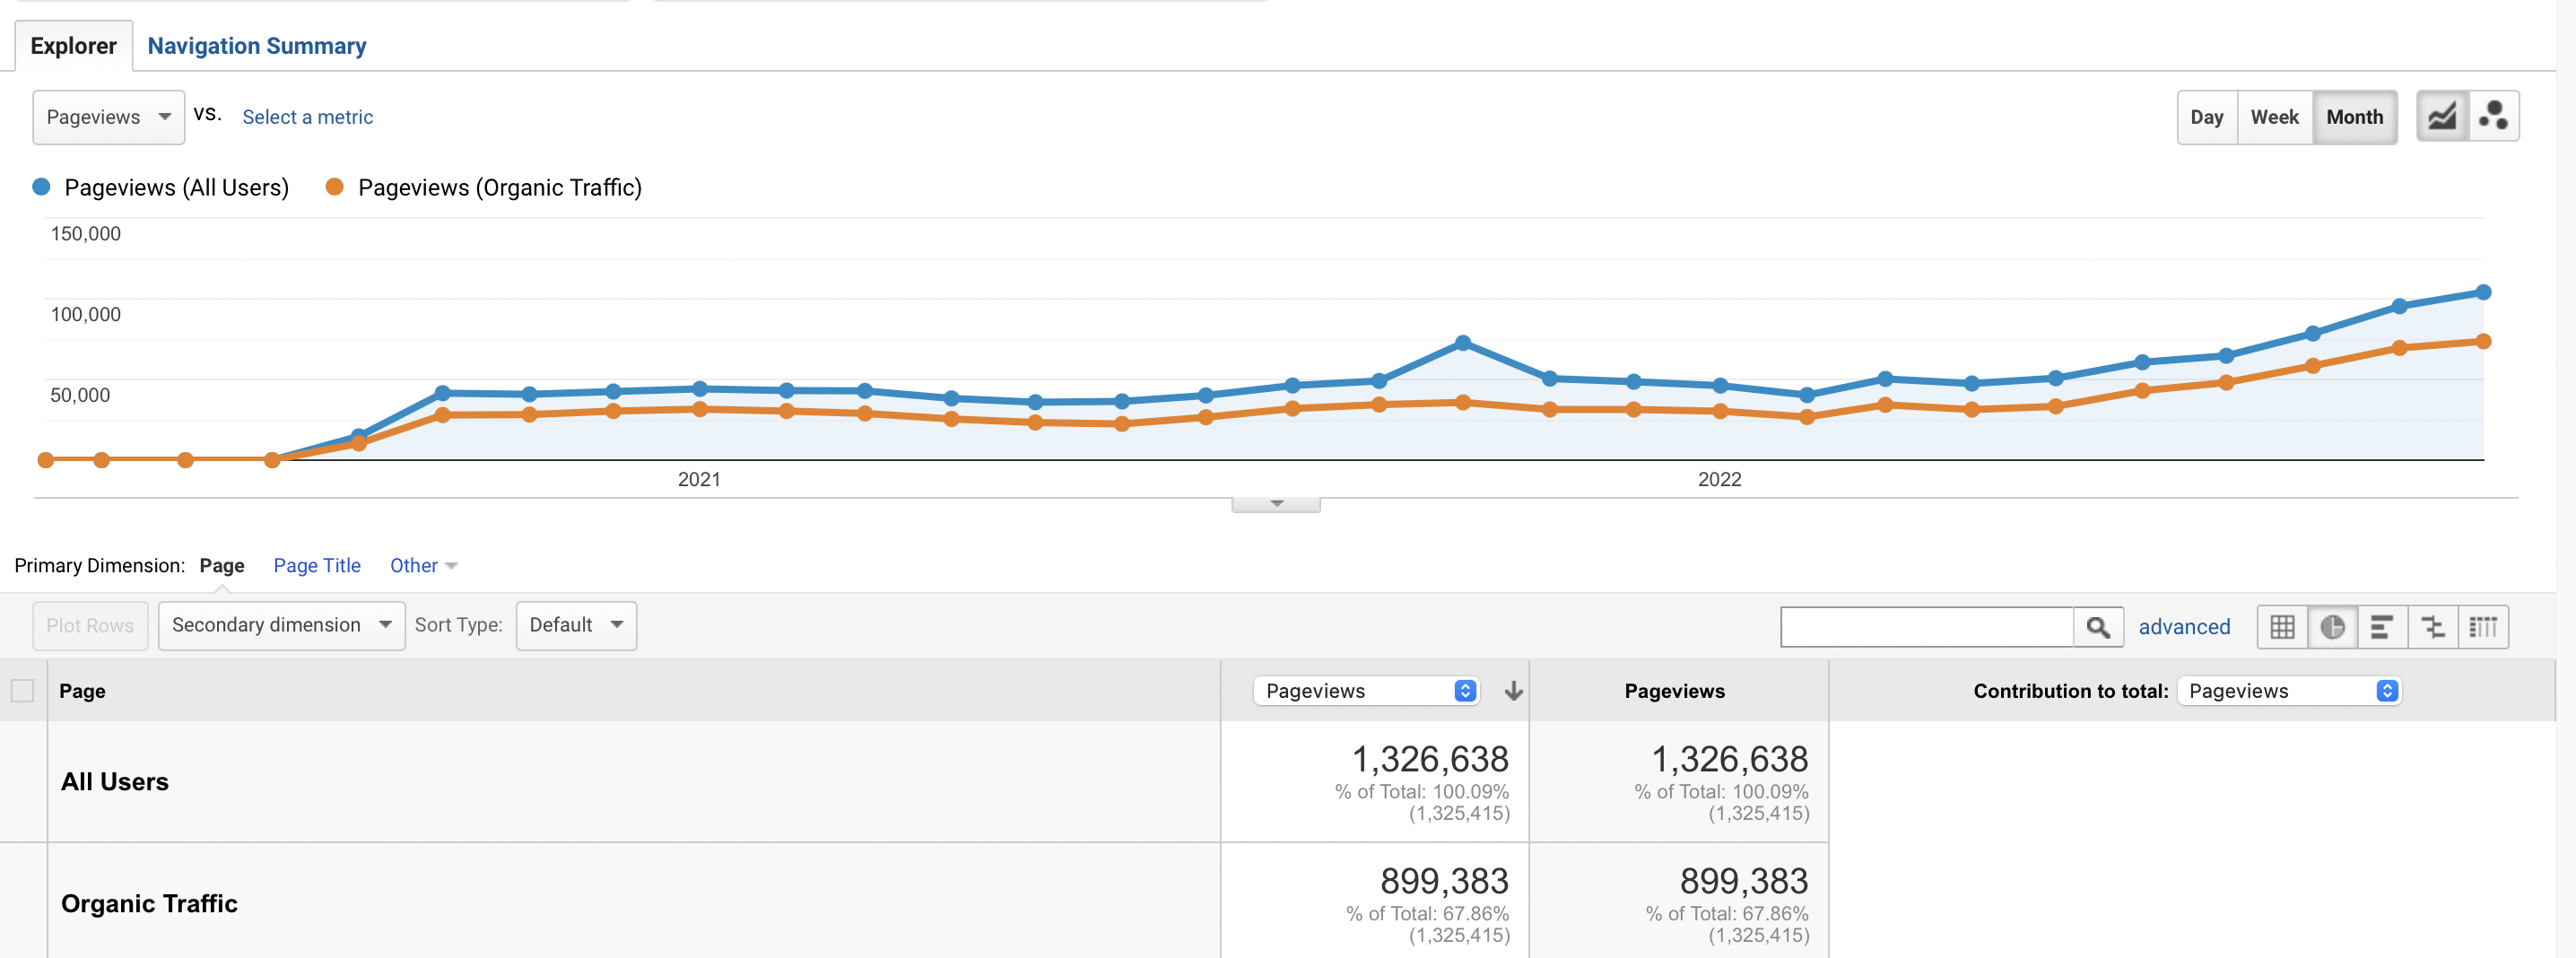 Client Results - Users & Organic Traffic